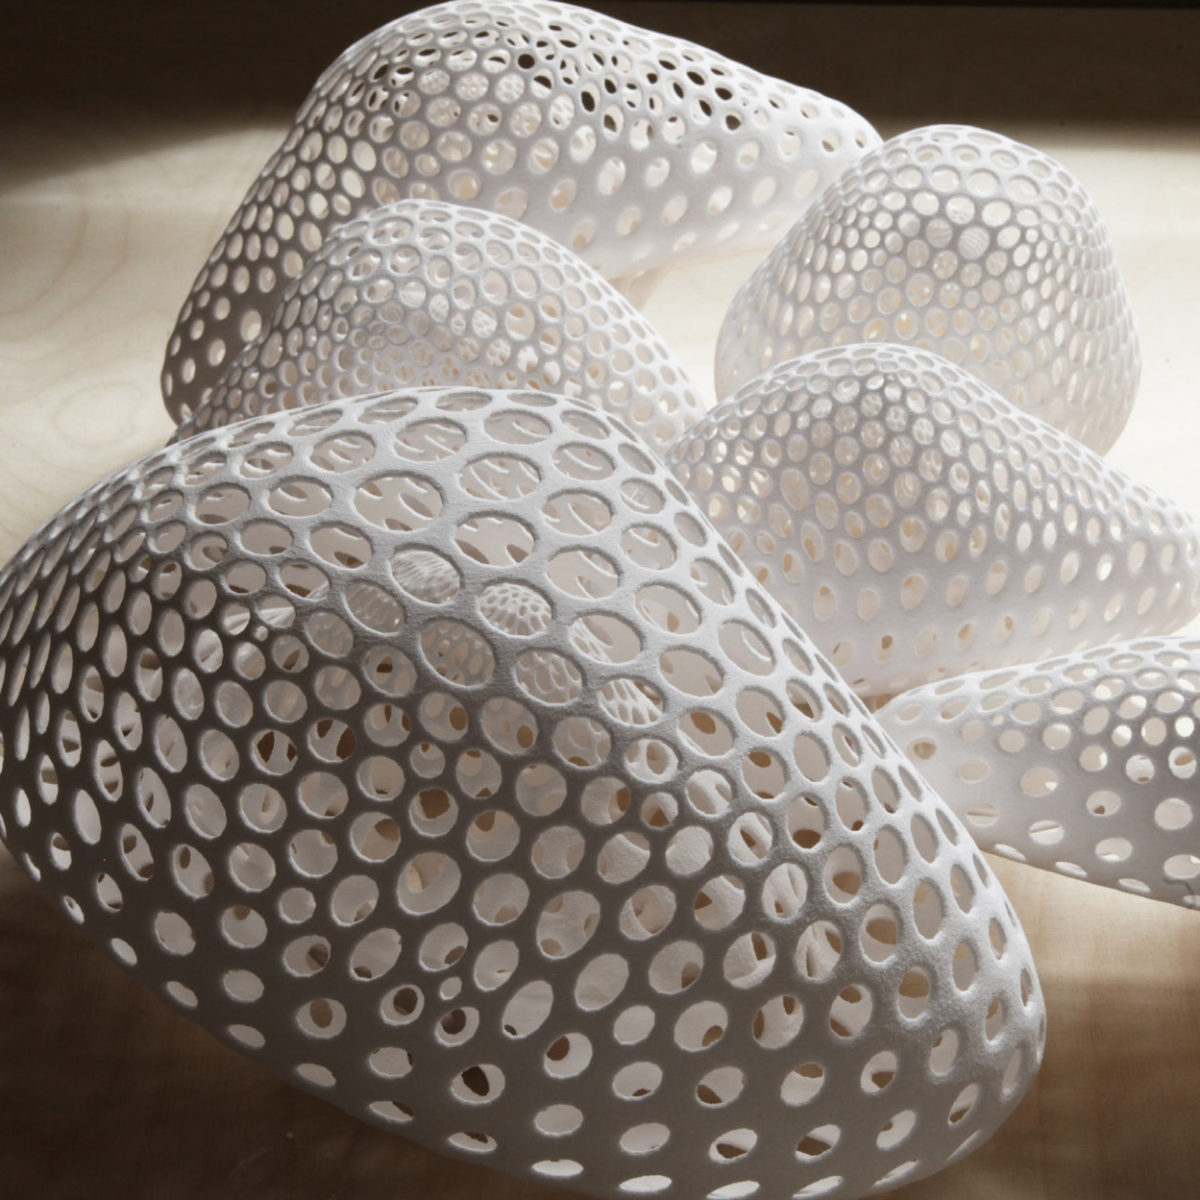 Overcast - Guan Lee, Mamou-Mani - 3D Printed Cloudlets Ceiling Installation